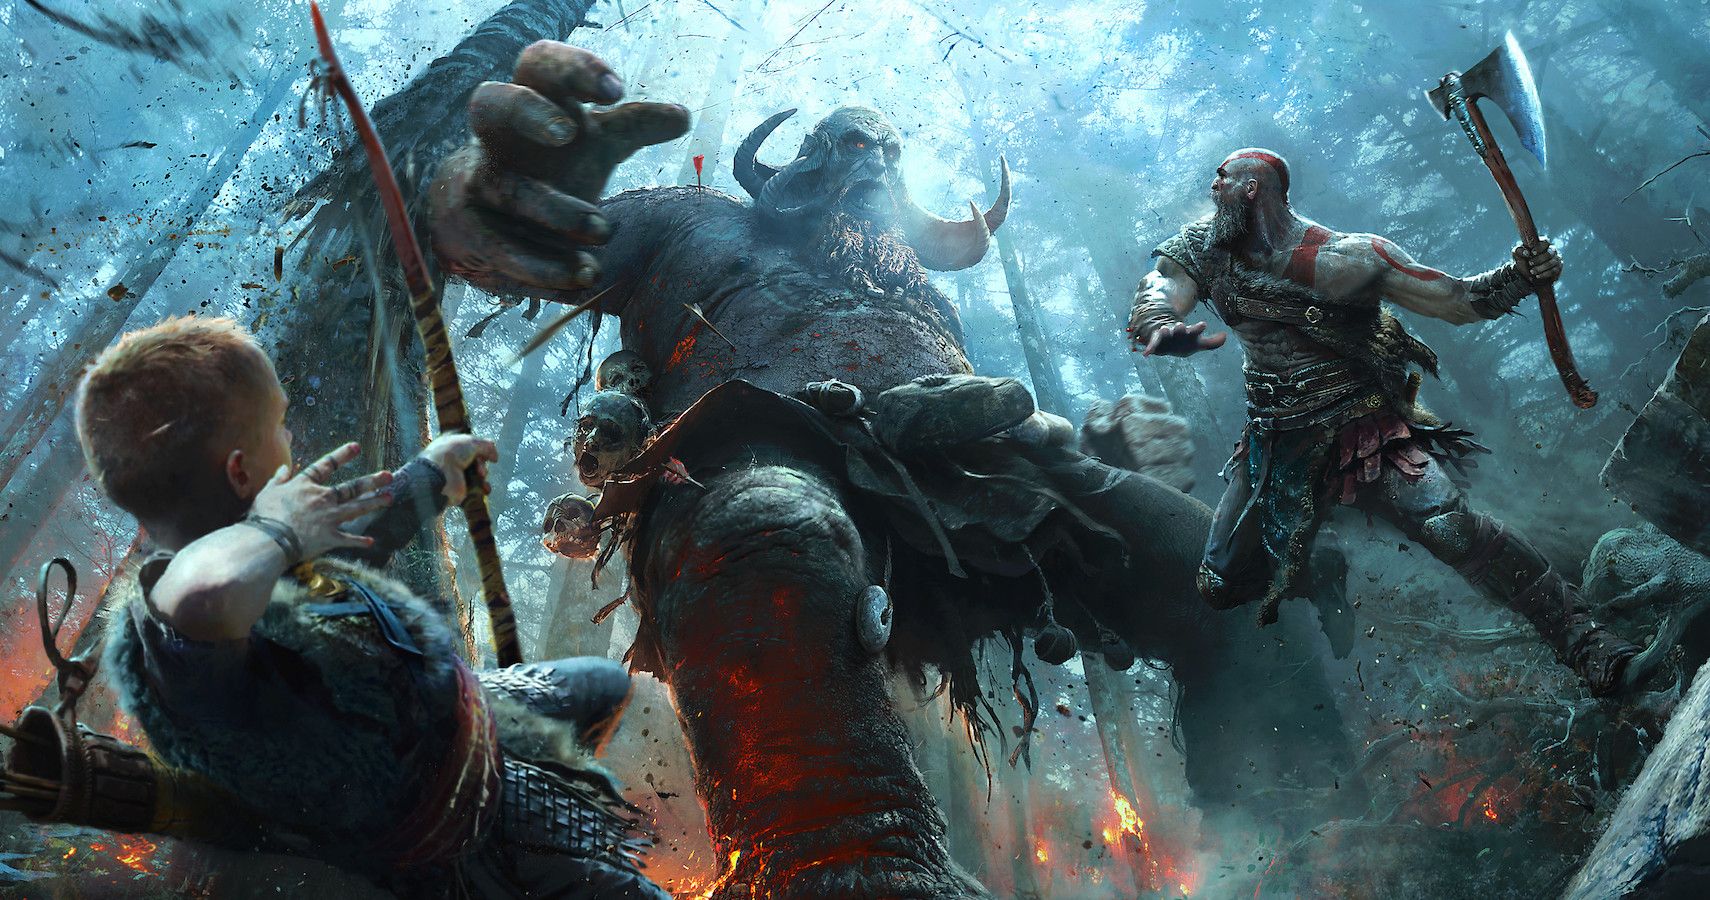 God Of War Director Says Games Script Was Rebooted A Year Into Its Development